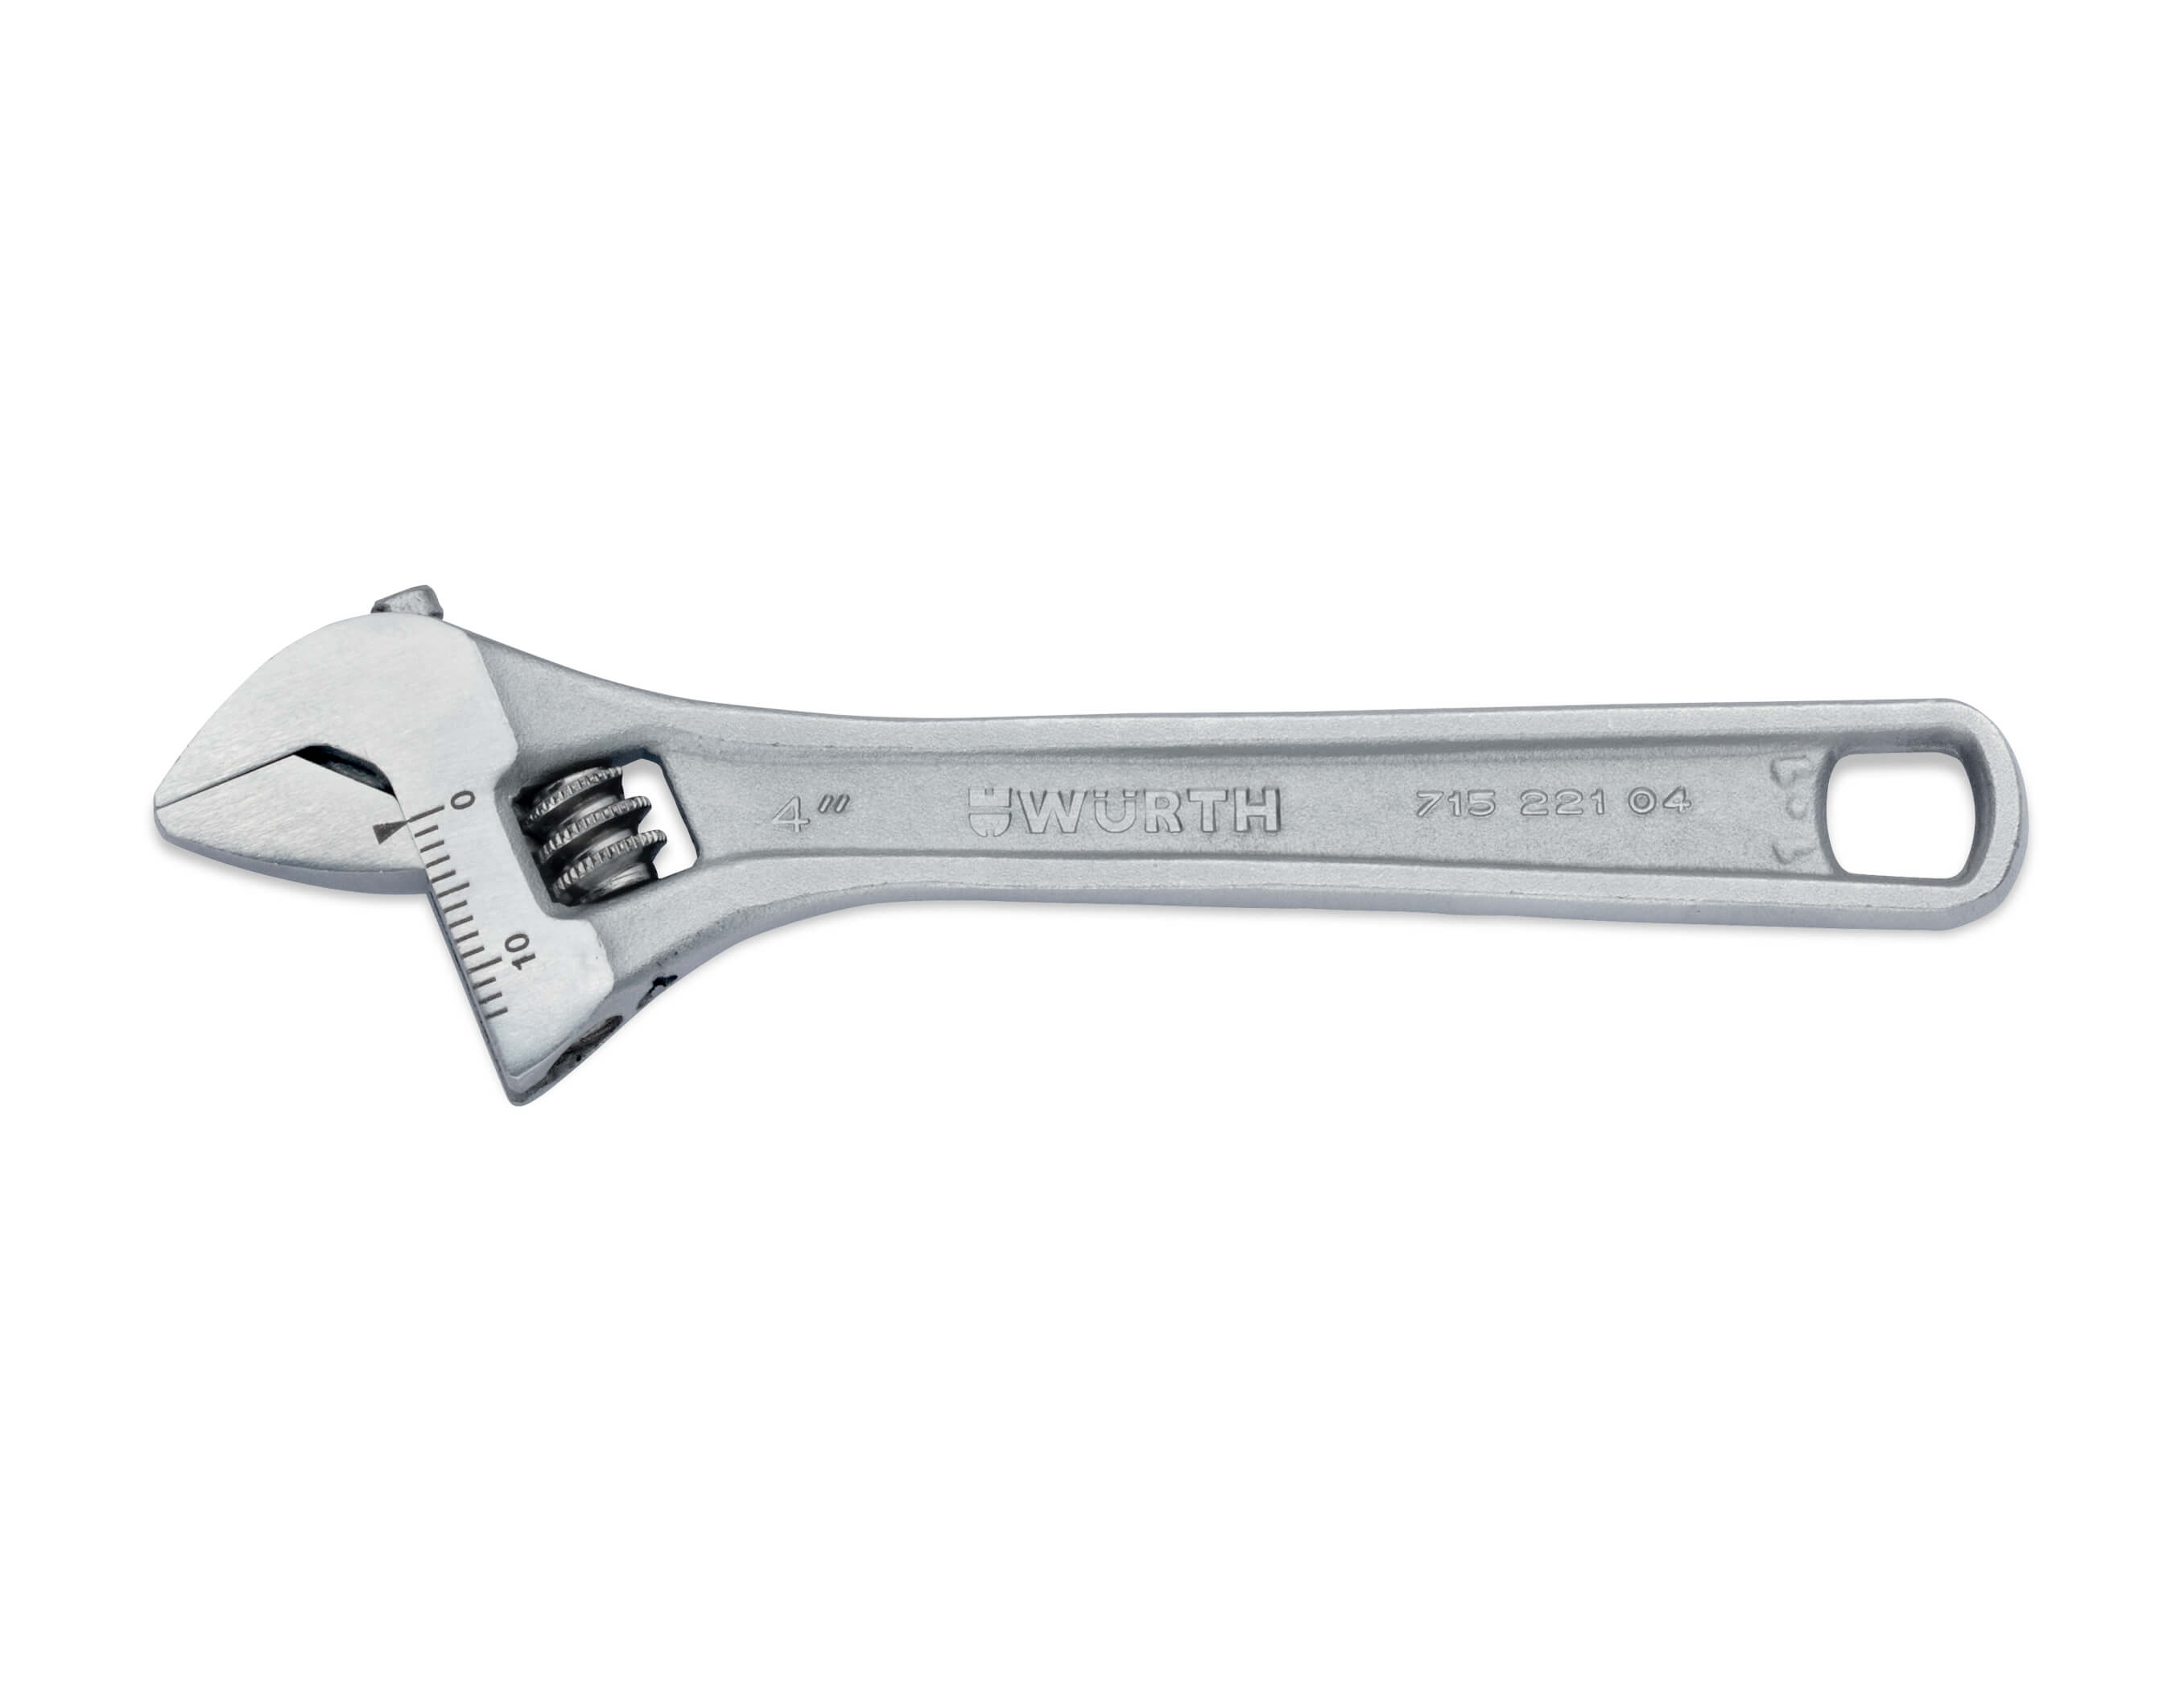 Adjustable open-end wrench 8IN